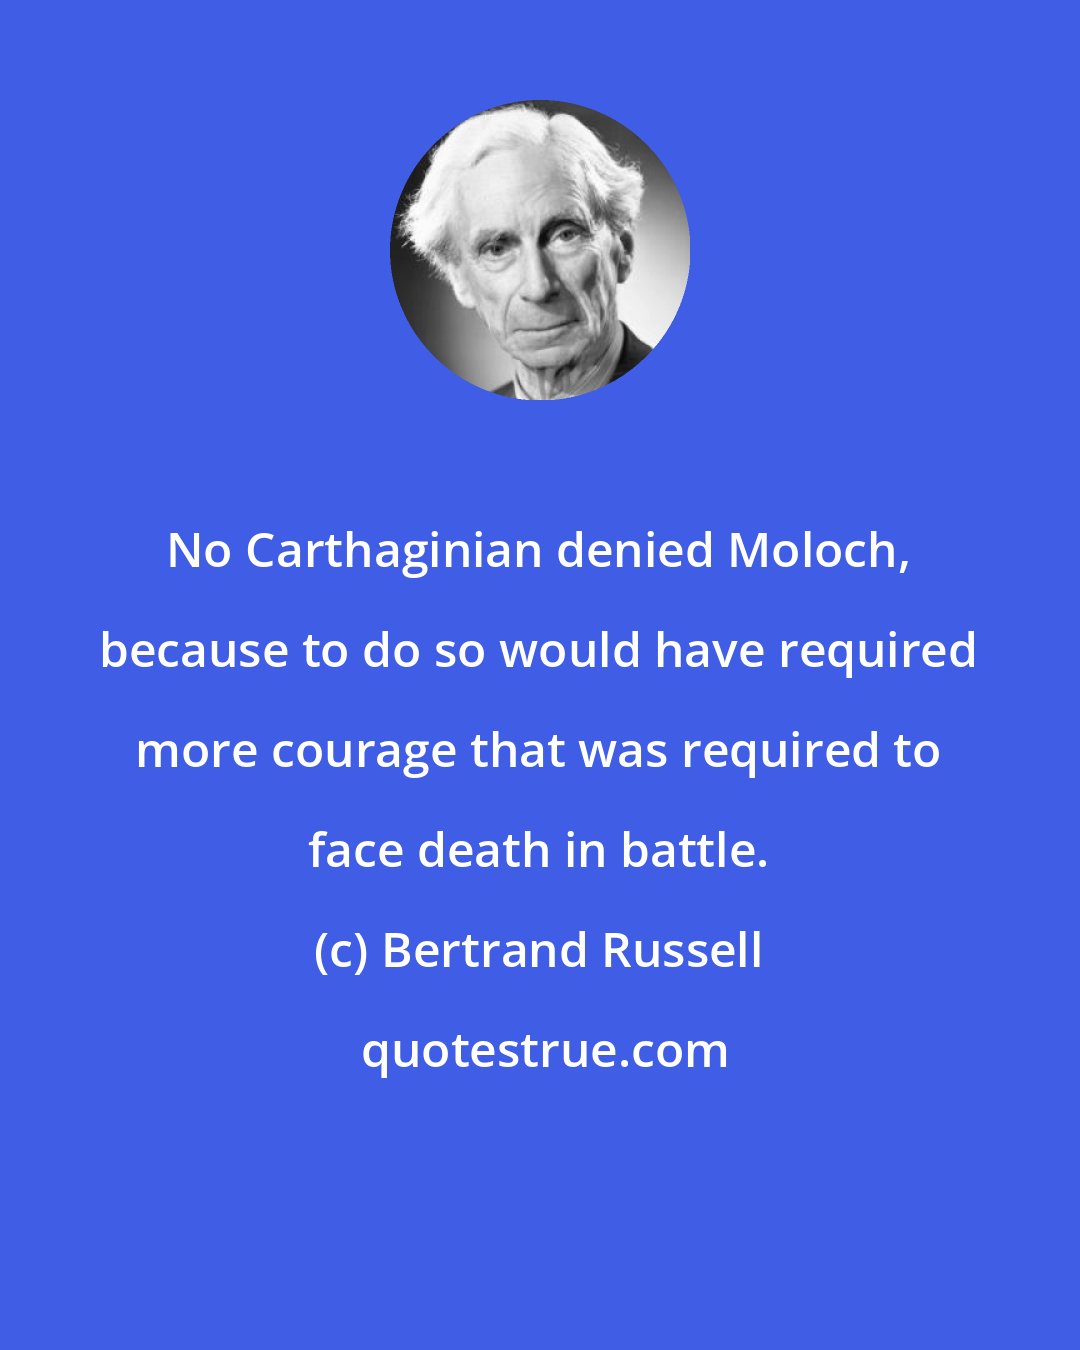 Bertrand Russell: No Carthaginian denied Moloch, because to do so would have required more courage that was required to face death in battle.